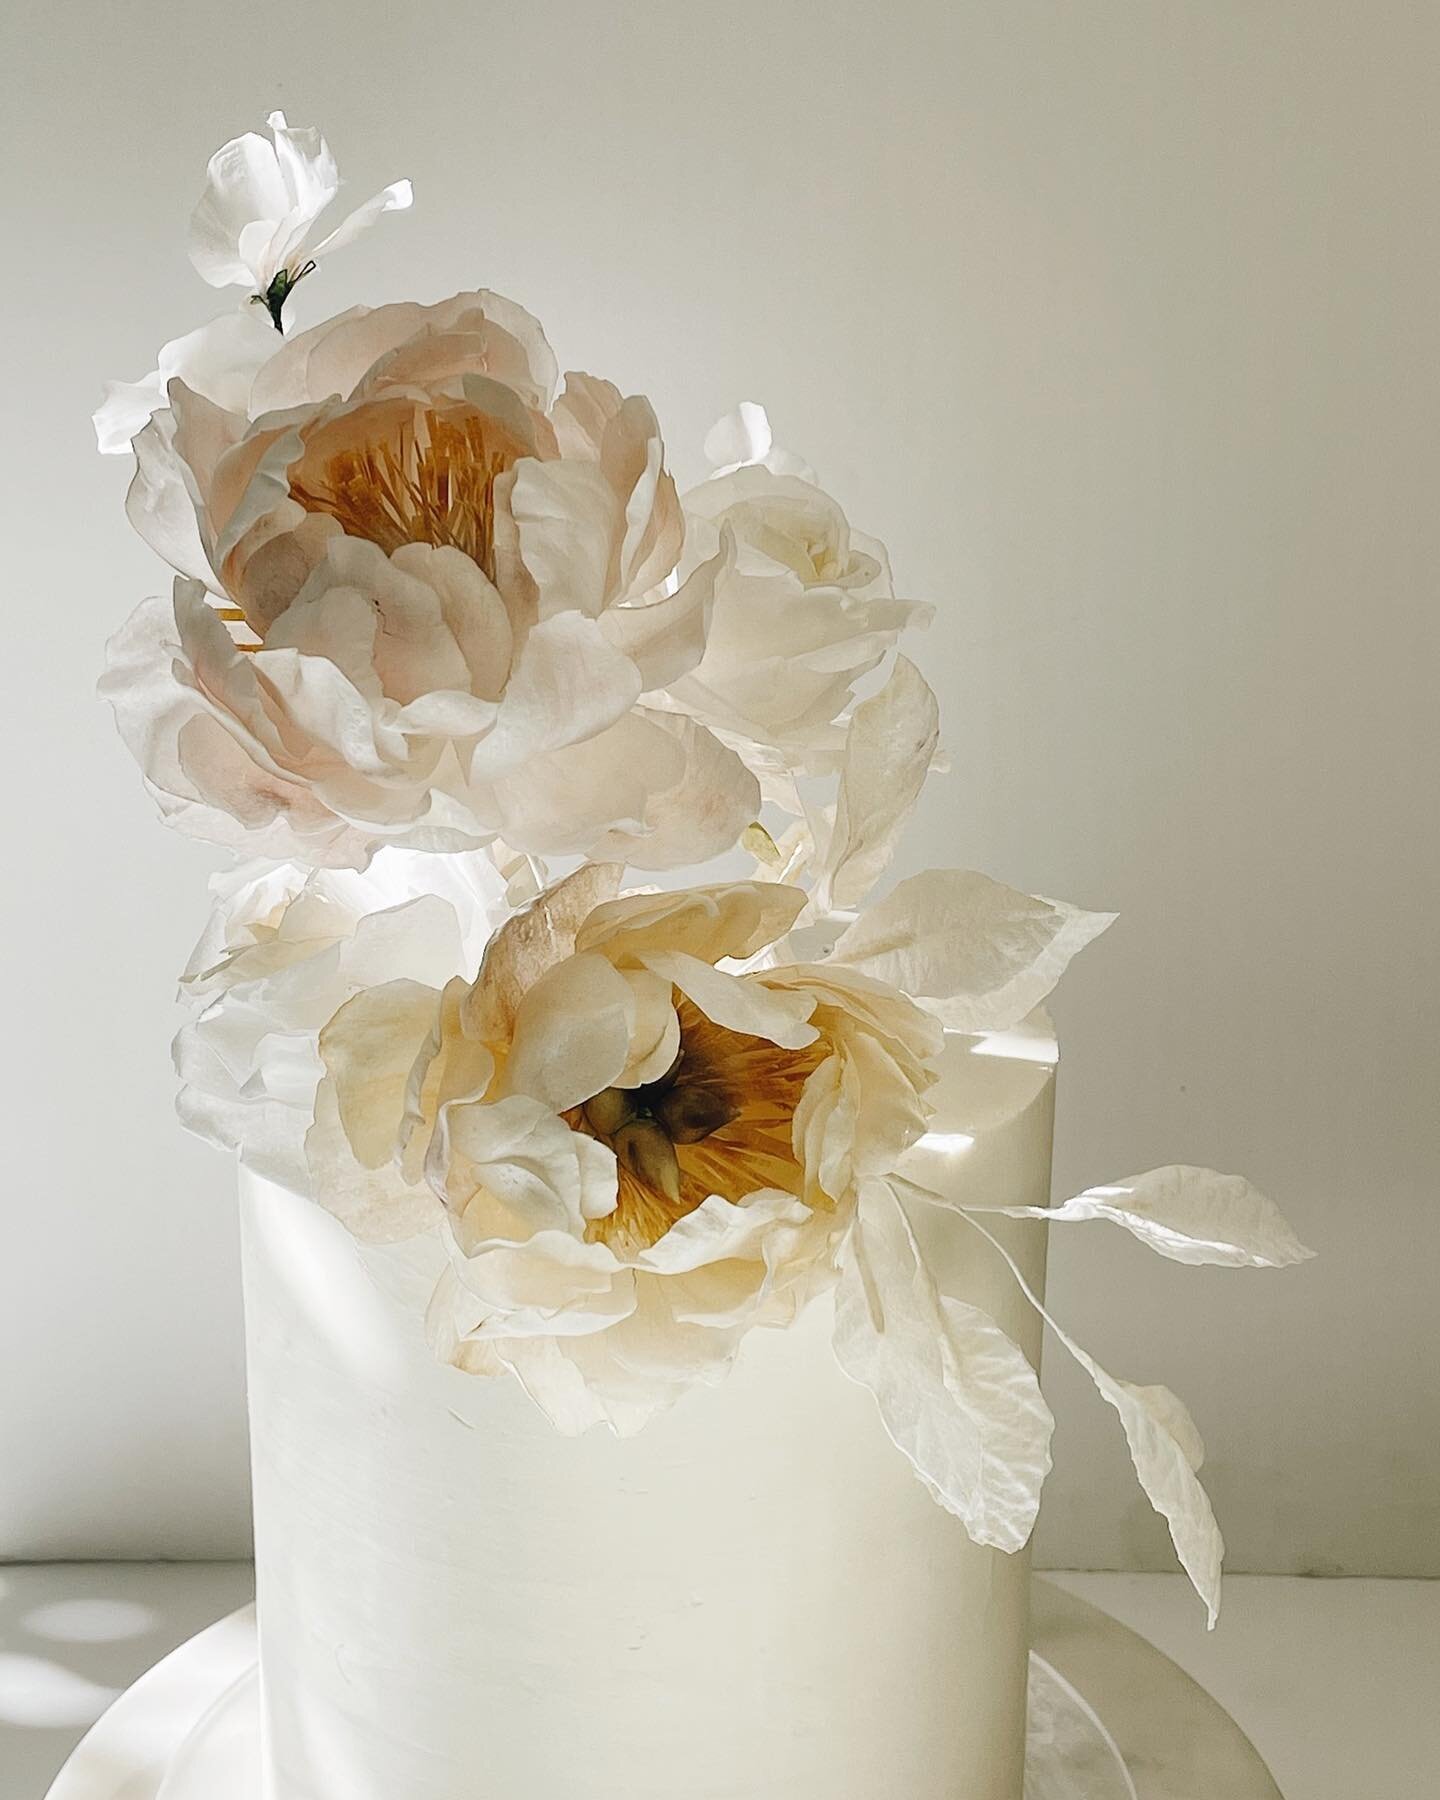 For Kathleen and Christian! Congrats on tying the knot! ⠀
⠀
A small cake with edible wafer paper peonies and sweet peas. Fun facts I&rsquo;d like to share with you when I make the sugar flowers: ⠀
⠀
*It is great to have main flowers(peonies), support